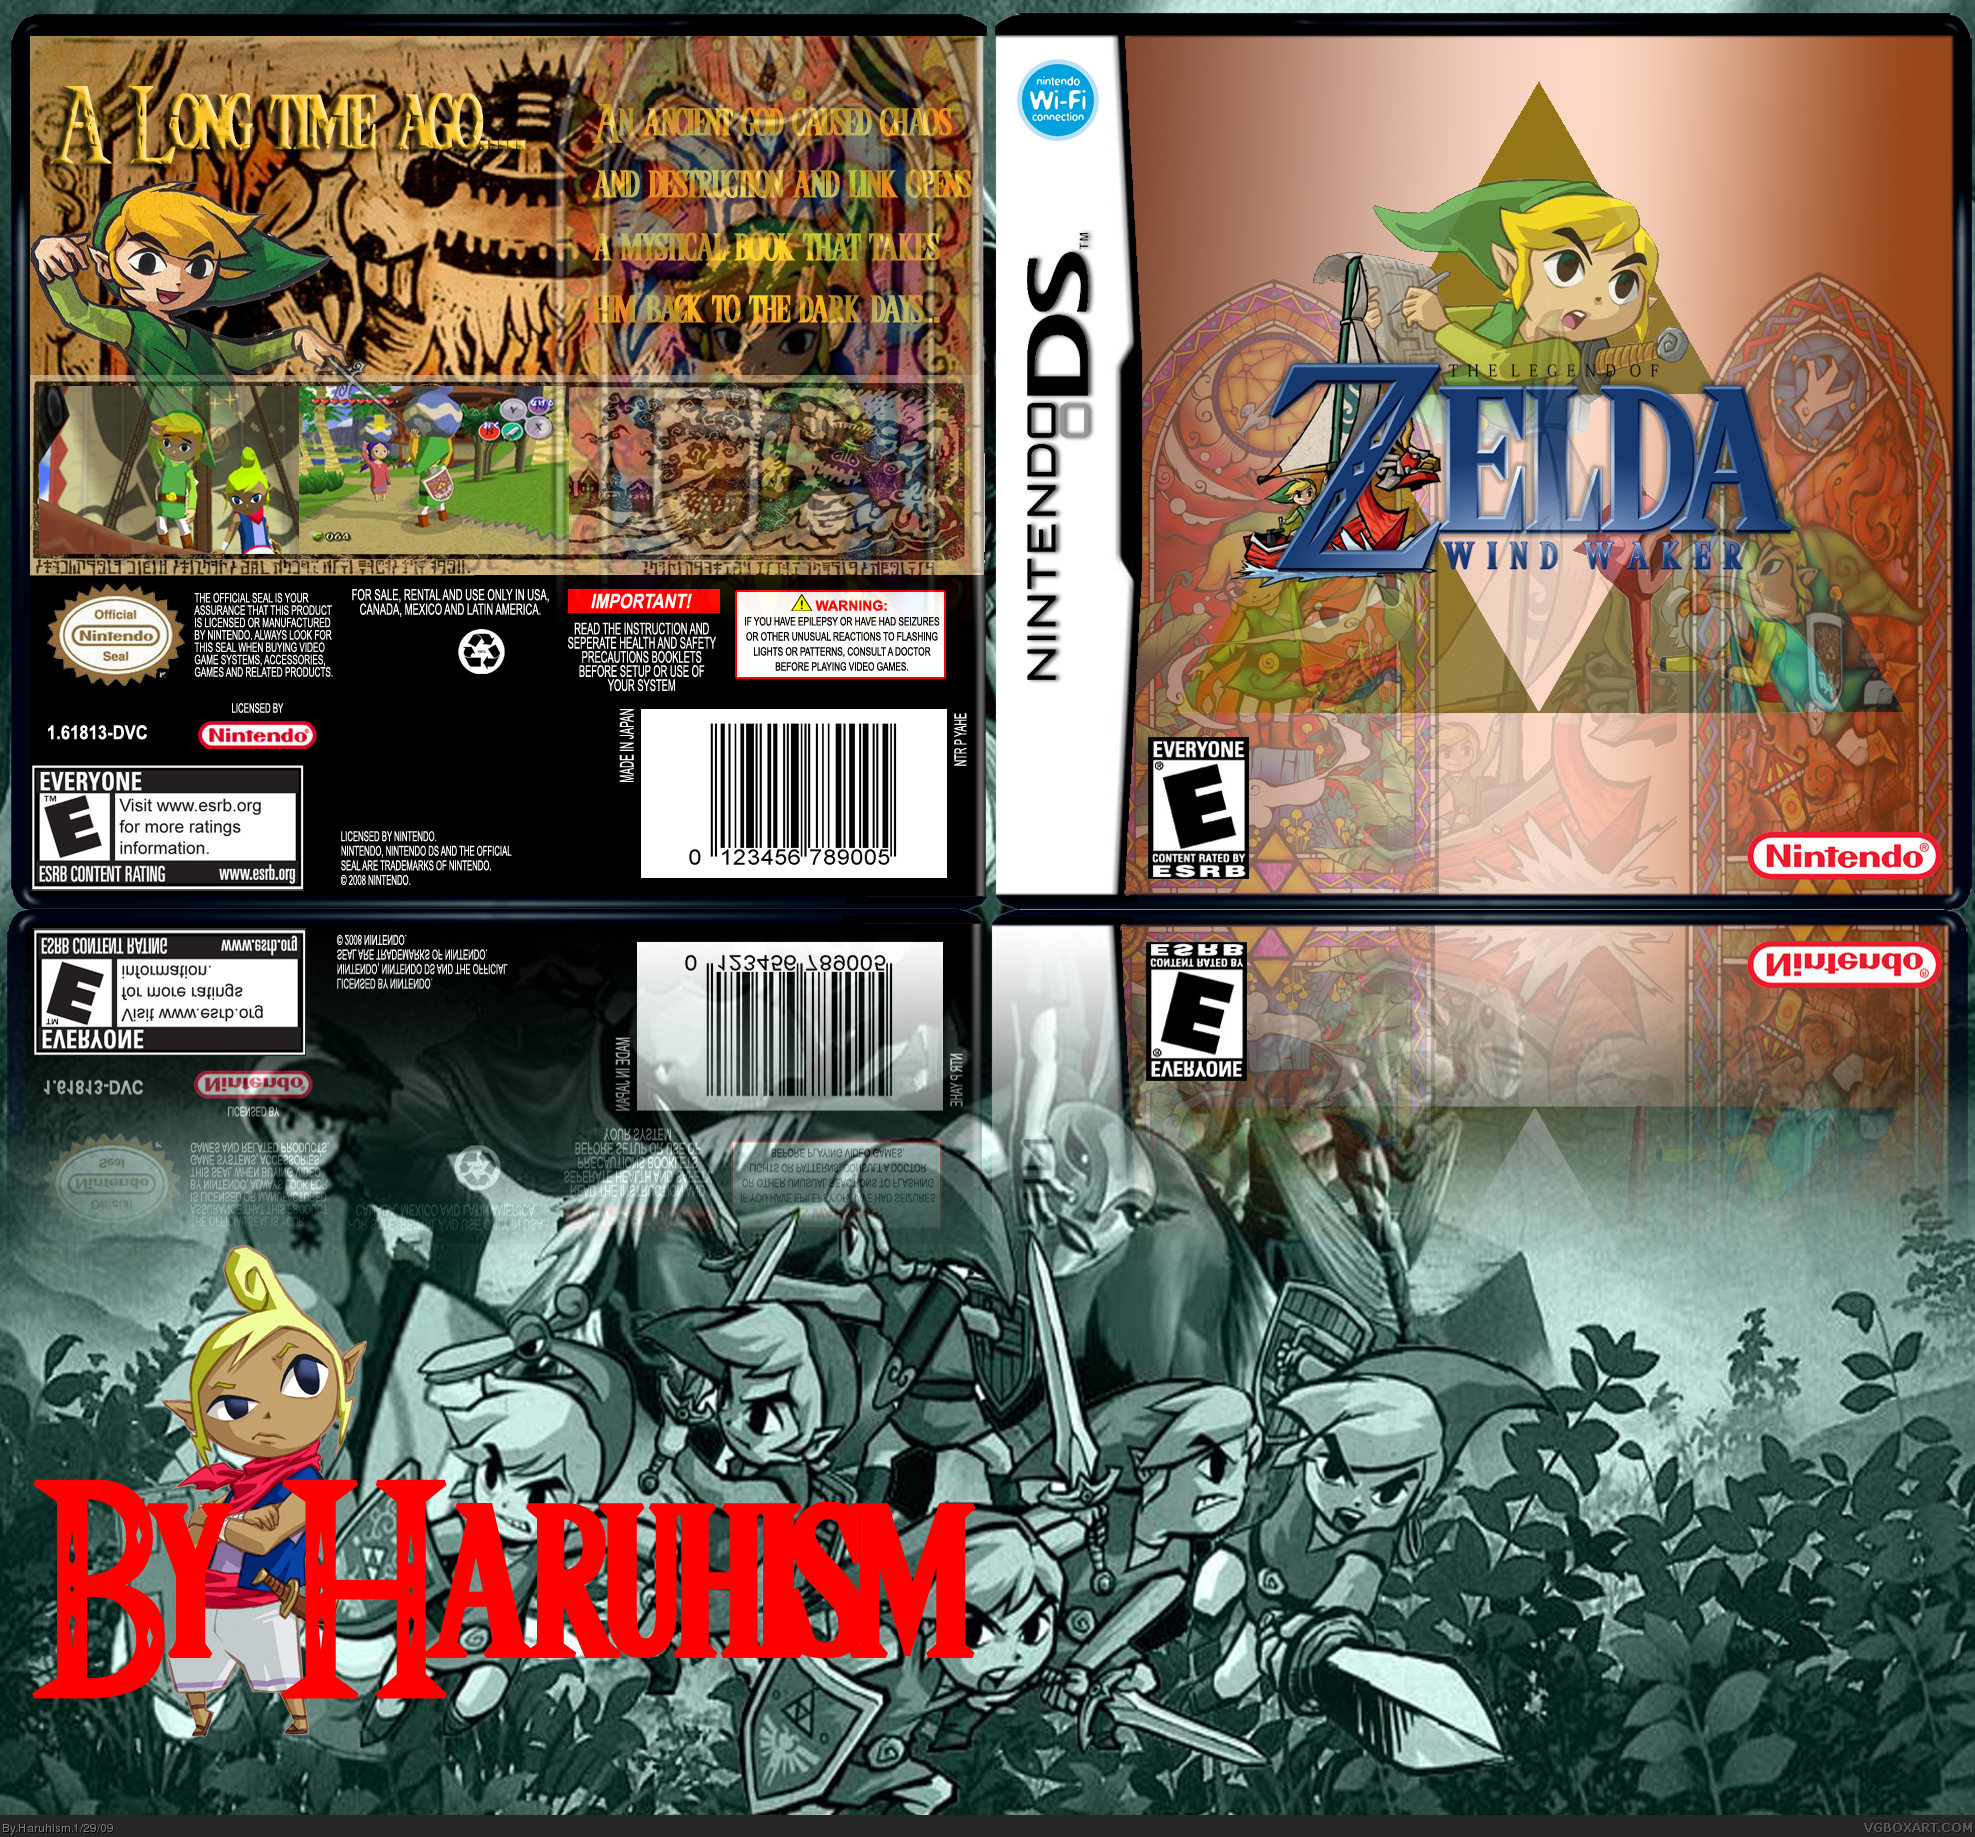 The Legend of Zelda The Wind Waker DS box cover